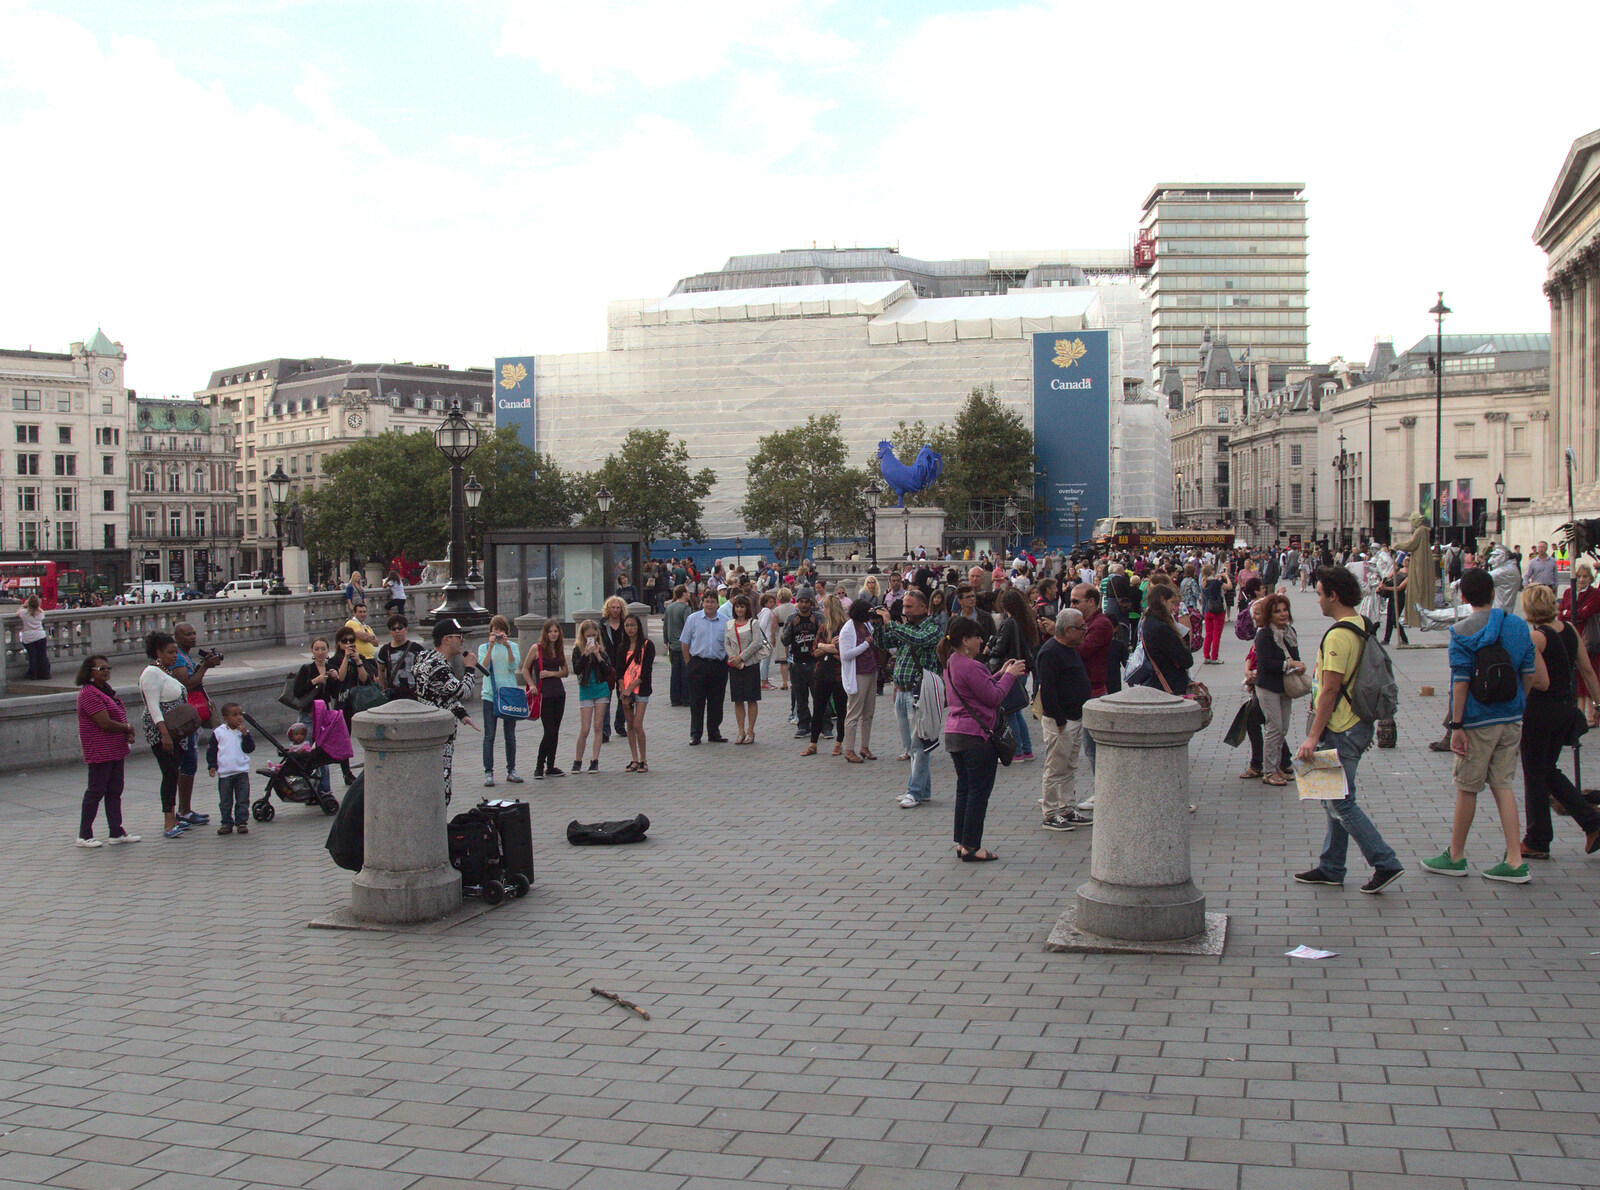 Crowds in Trafalgar Square from SwiftKey Innovation Day, and Pizza Pub, Westminster and Southwark - 14th August 2014